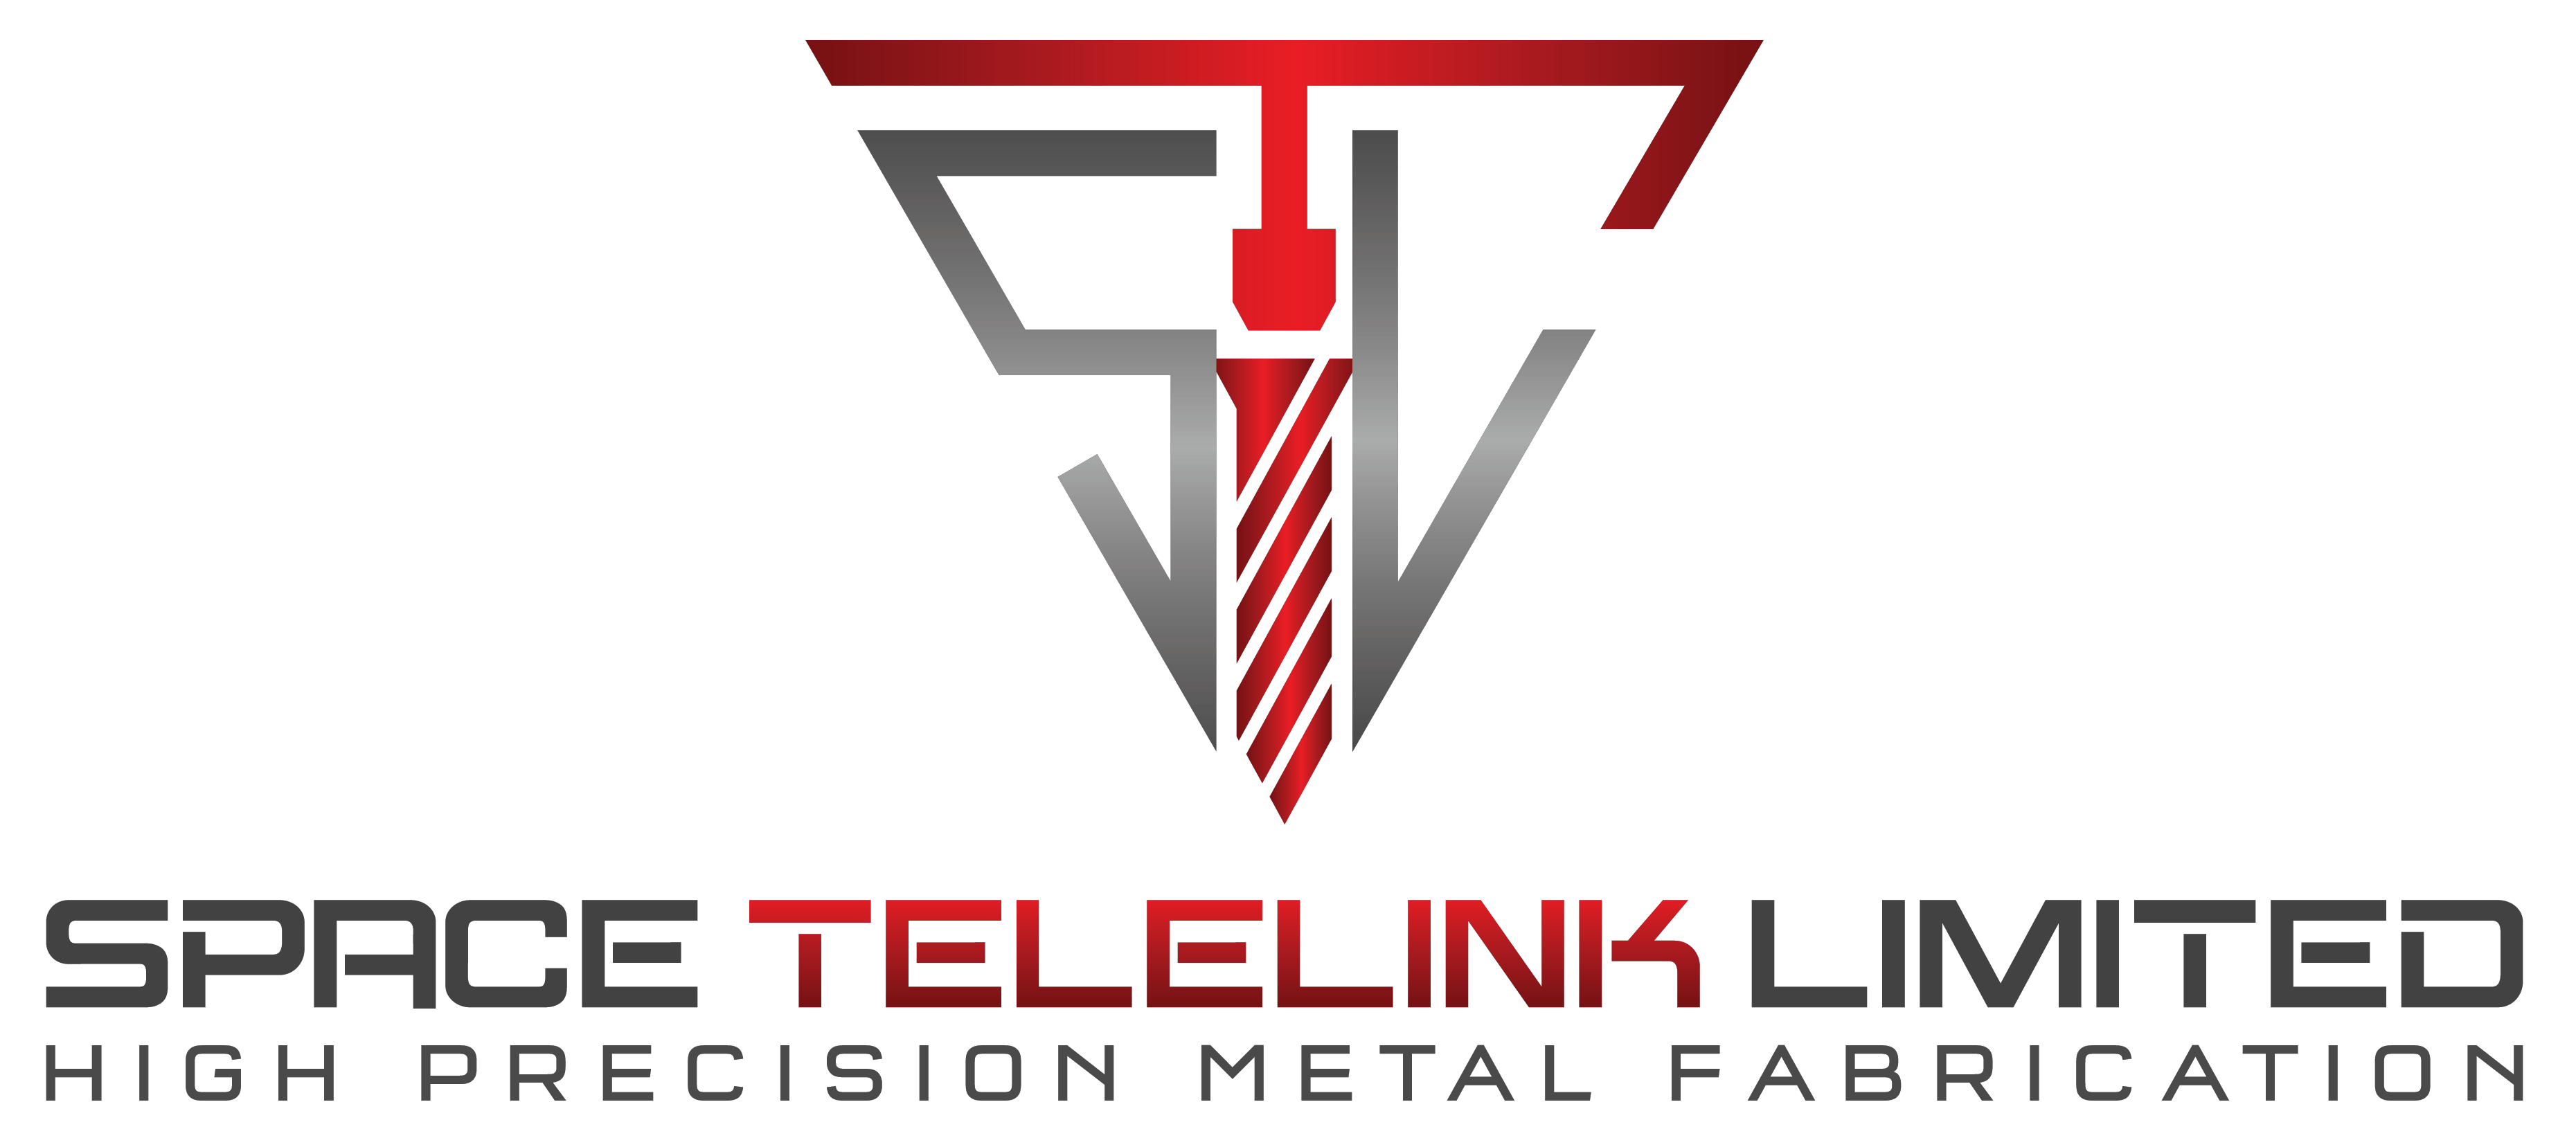 Space Telelink – A leading provider of Sheet metal Solutions to all telecom companies, OEM, TowerCos in India